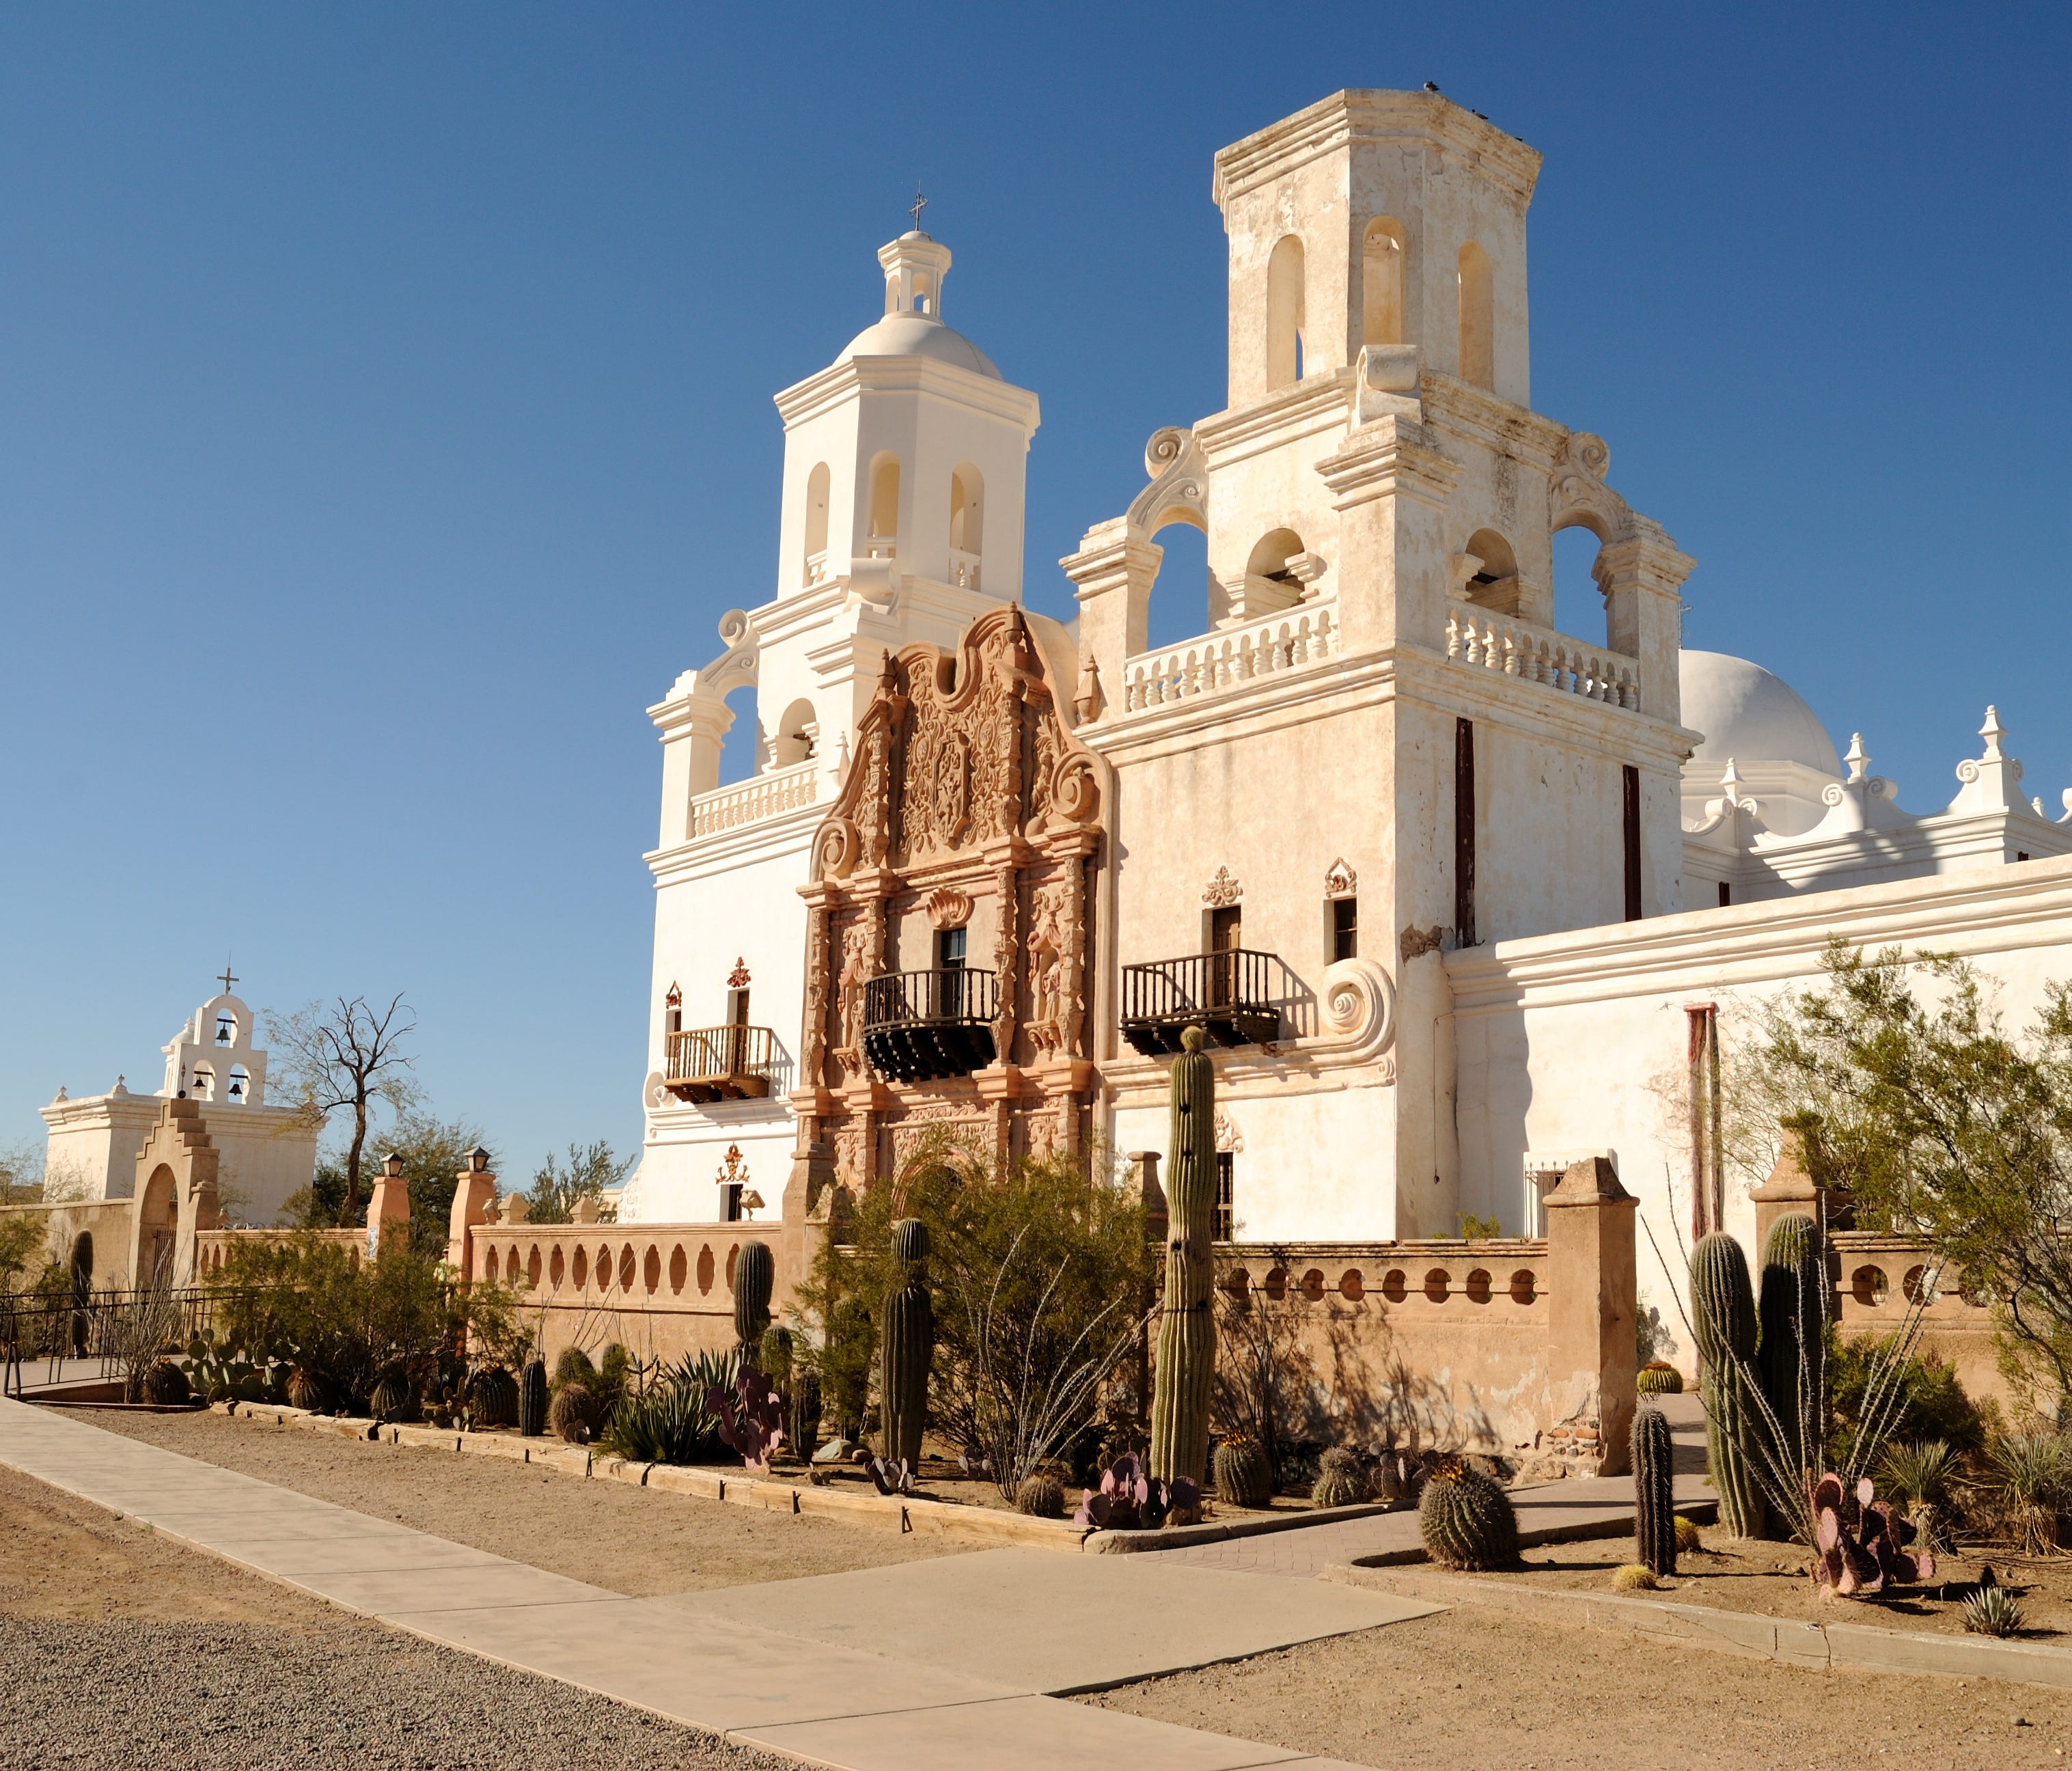 San Xavier Del Bac, near Tucson (Father Kino): An 18th-century Catholic Spanish Colonial mission located on a reservation. Currently serves as a designated National Historic Landmark, as well as a functioning church. Architectural elements include wh